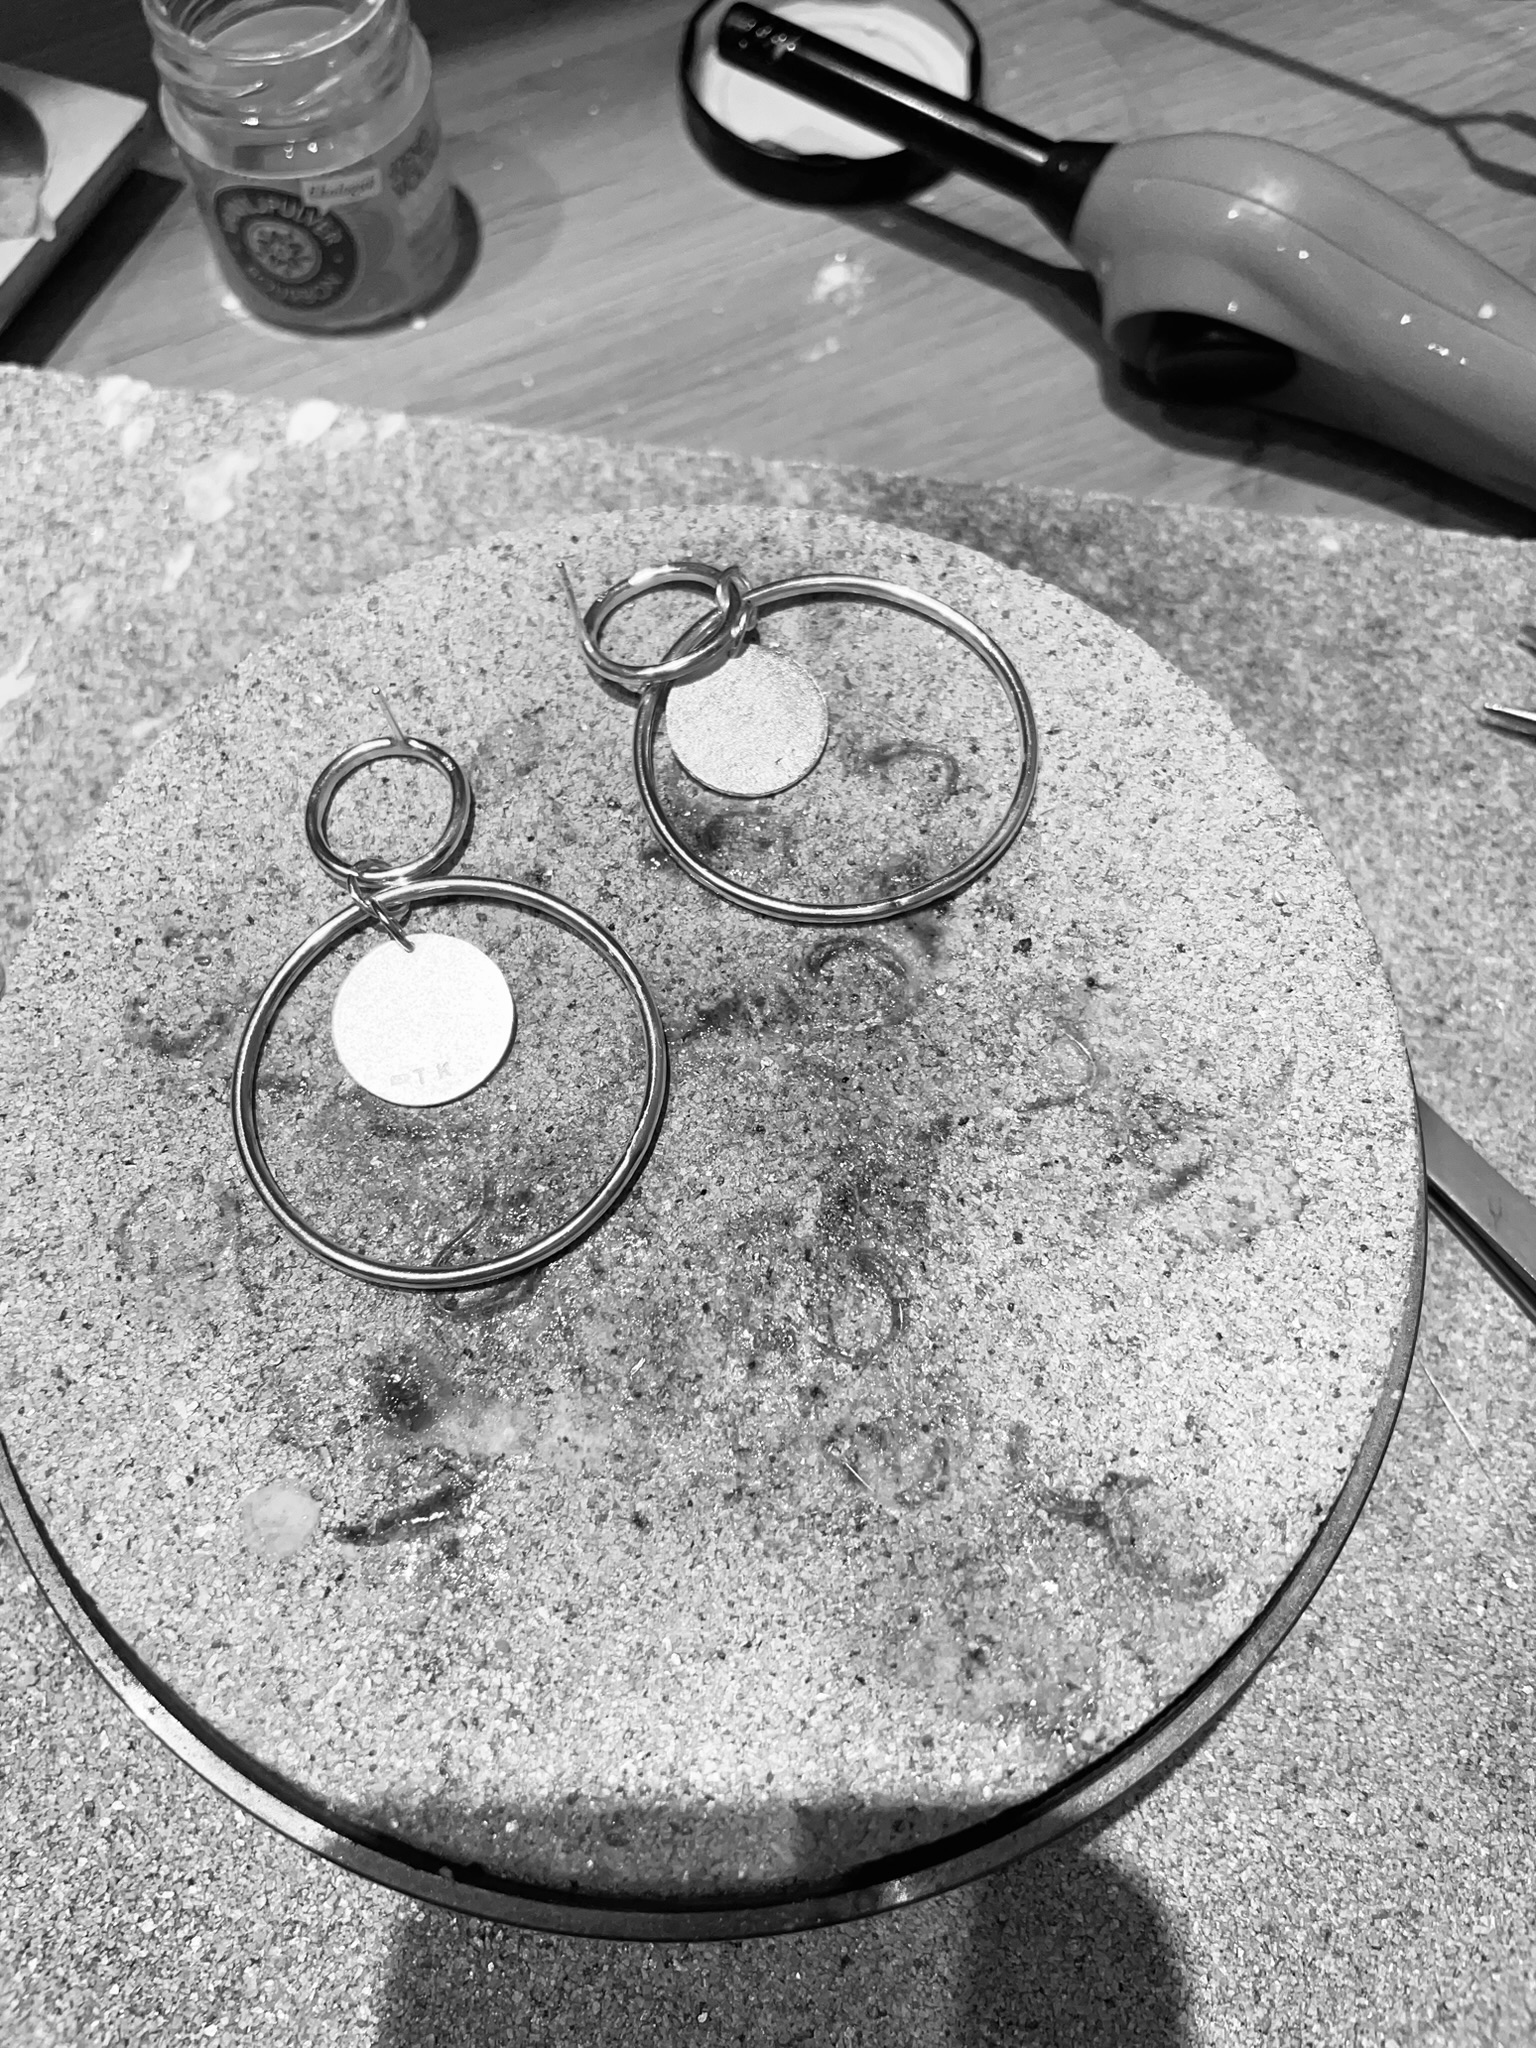 Two big earrings of silver circles put togehter on a silversmith's bench